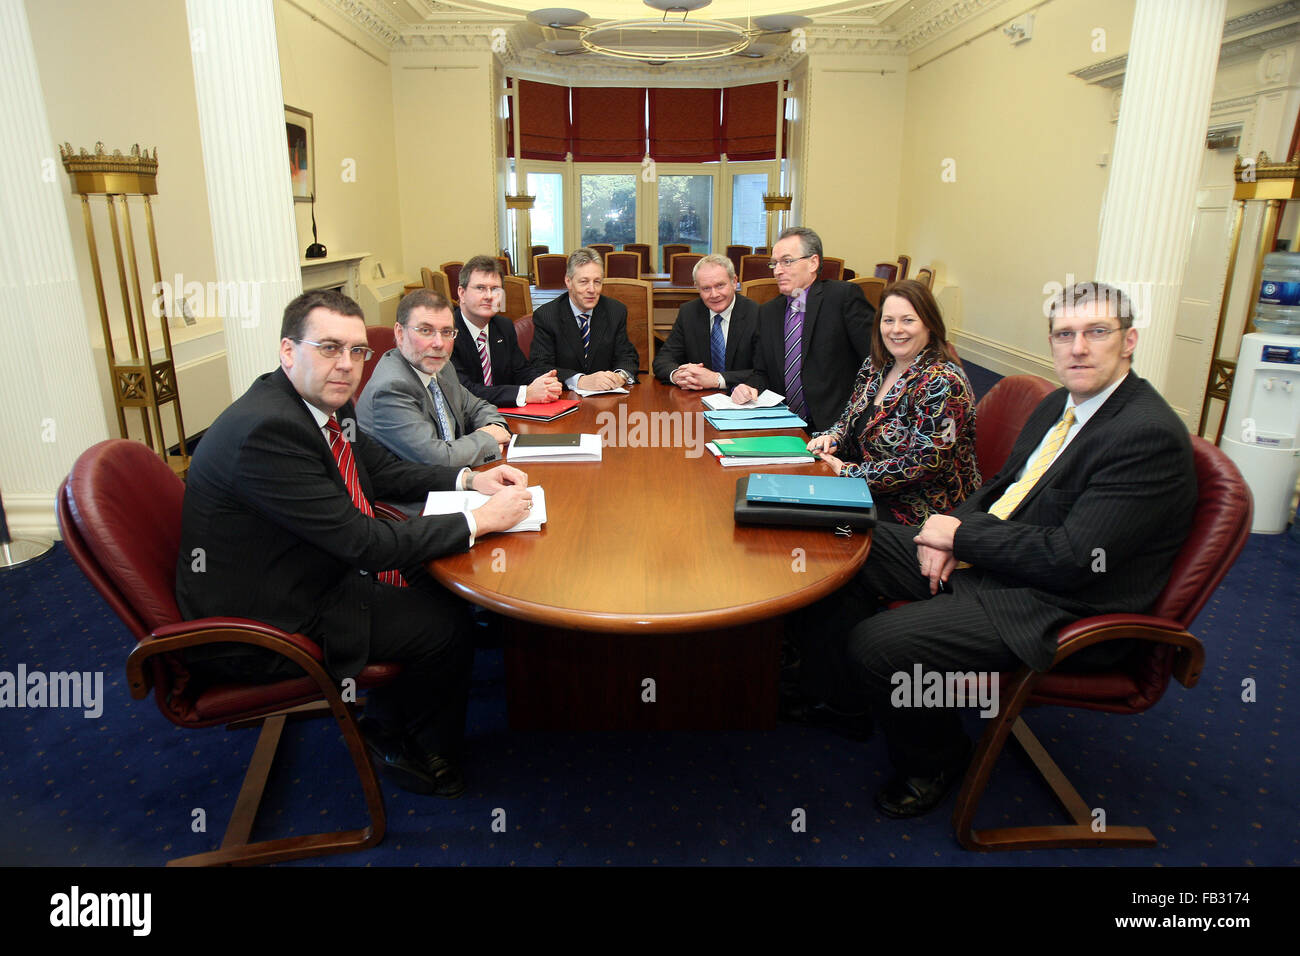 Six assembly members - three from the DUP and three from Sinn Fein meet for the first time to examine the issue of parading. (from left to right)  Stephen Moutray, Nelson McCausland, Jeffrey Donaldson from the DUP, (Chaired by) The Northern Ireland's First Minister Peter Robinson and Deputy First Minister Martin McGuinness, meet Gerry Kelly, Michelle Gildernew and John O'Dowd from Sinn Fein at Stormont Castle, Stormont, Belfast, Feb 9th, 2010. This new Parading Body has until 23rd February to come up with agreed outcomes capable of achieving cross-community support and try to find a way to dea Stock Photo